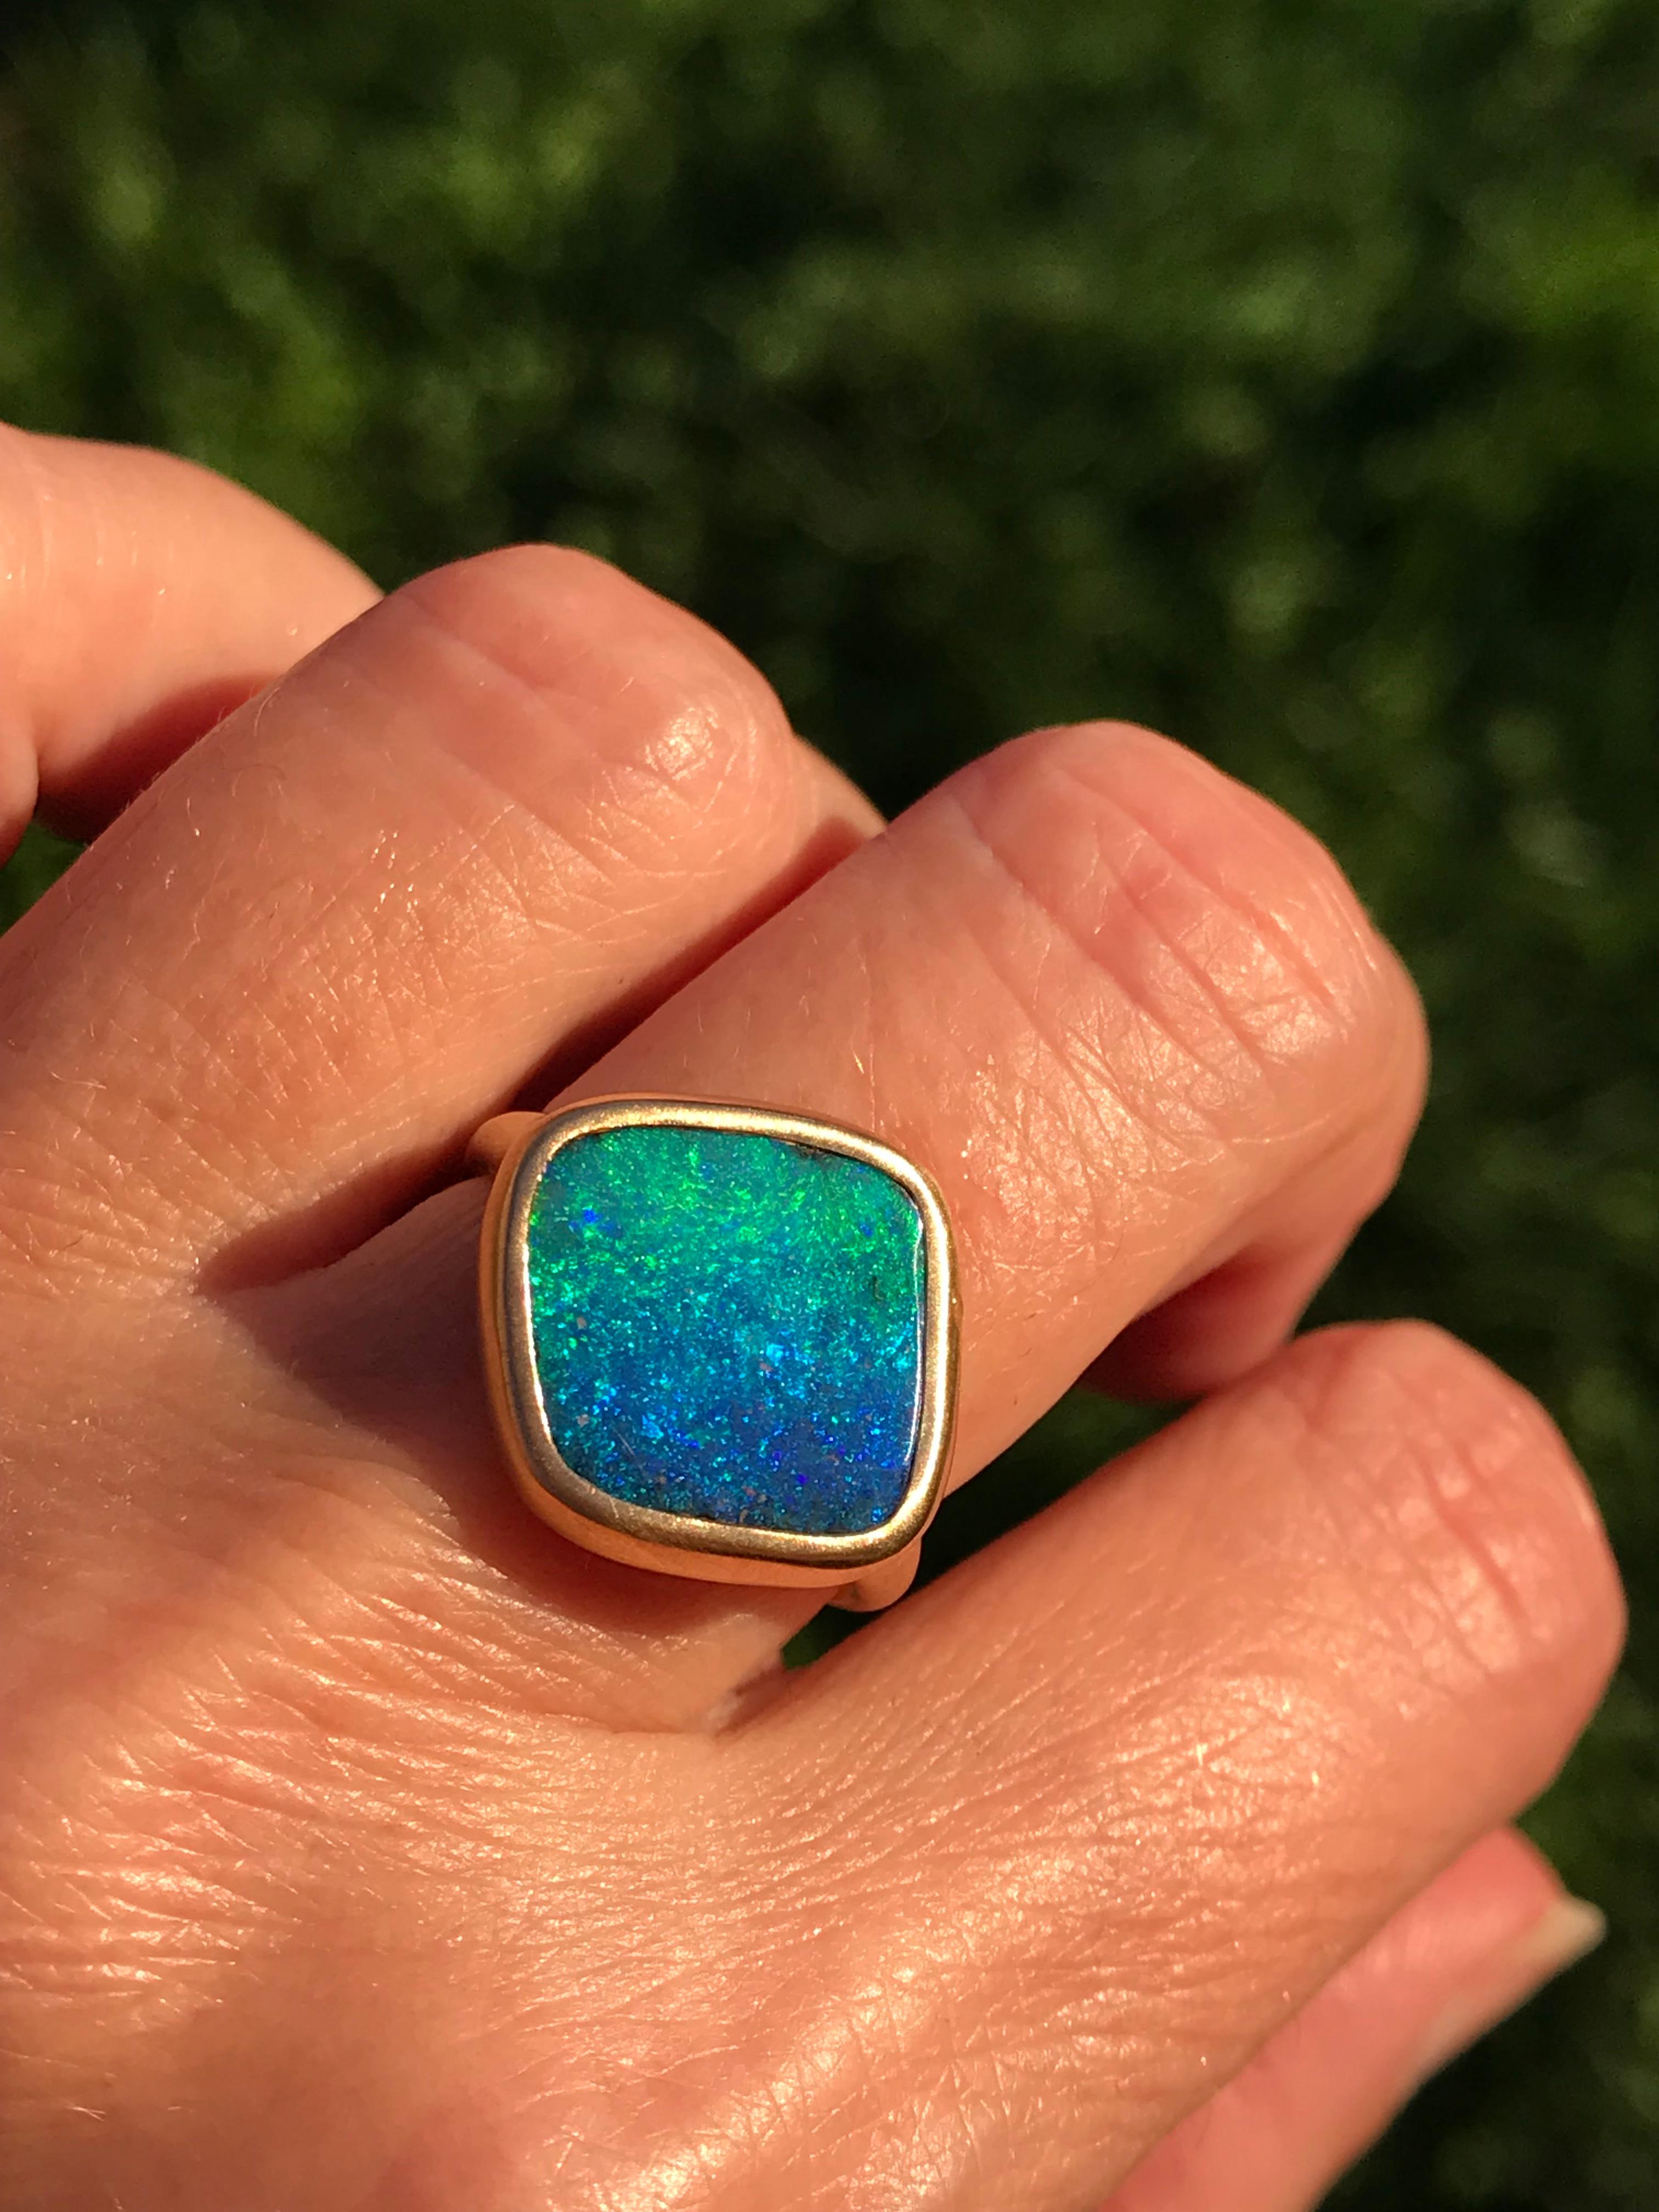 Dalben design One of a kind 18 kt yellow  gold satin finishing ring with a blue green colors solid Australian Boulder Opal rhombus shape weight 4,63 carats  .
Ring size  US 7   -  EU 54+ re-sizable .  
Bezels setting dimension:  
max width 17,5 mm, 